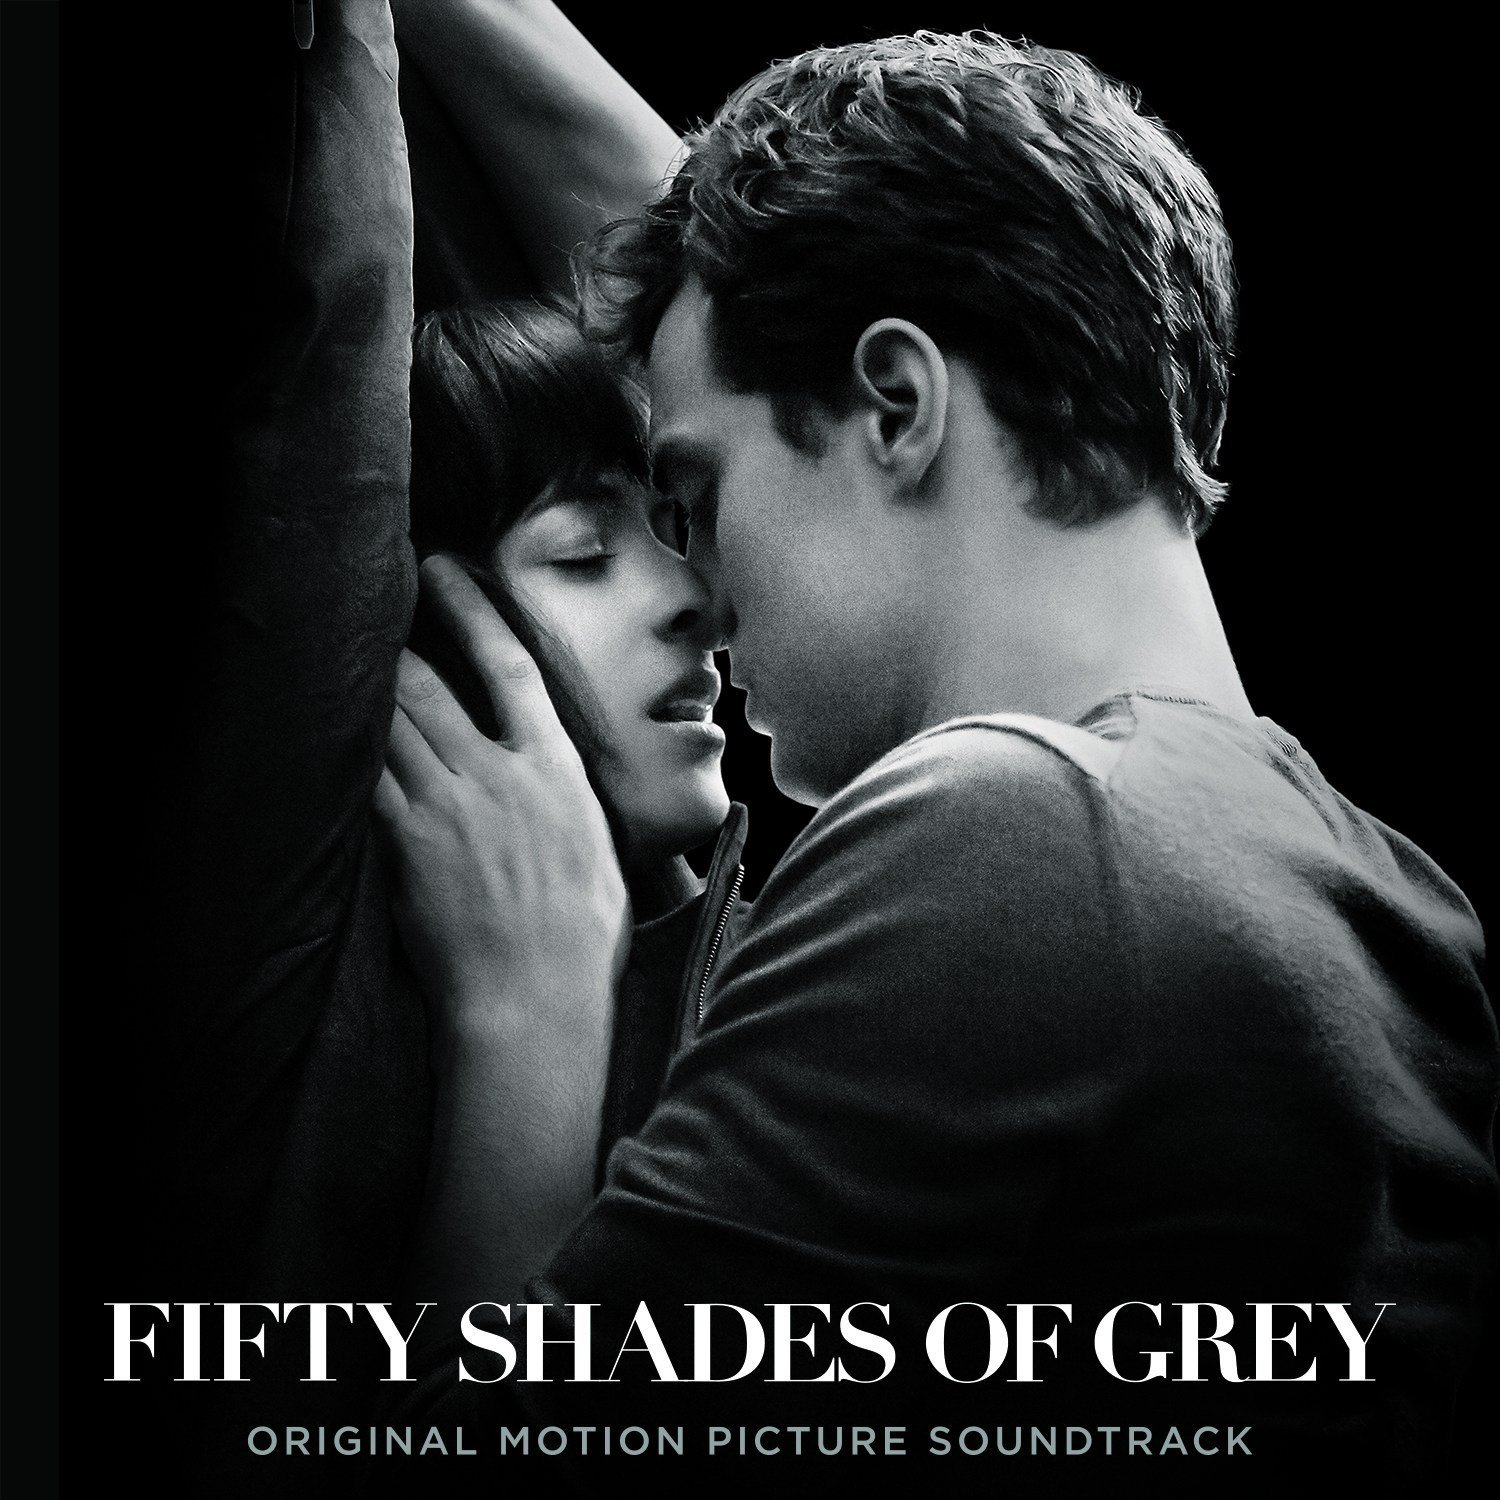 fifty shades of grey movie download mp4 free